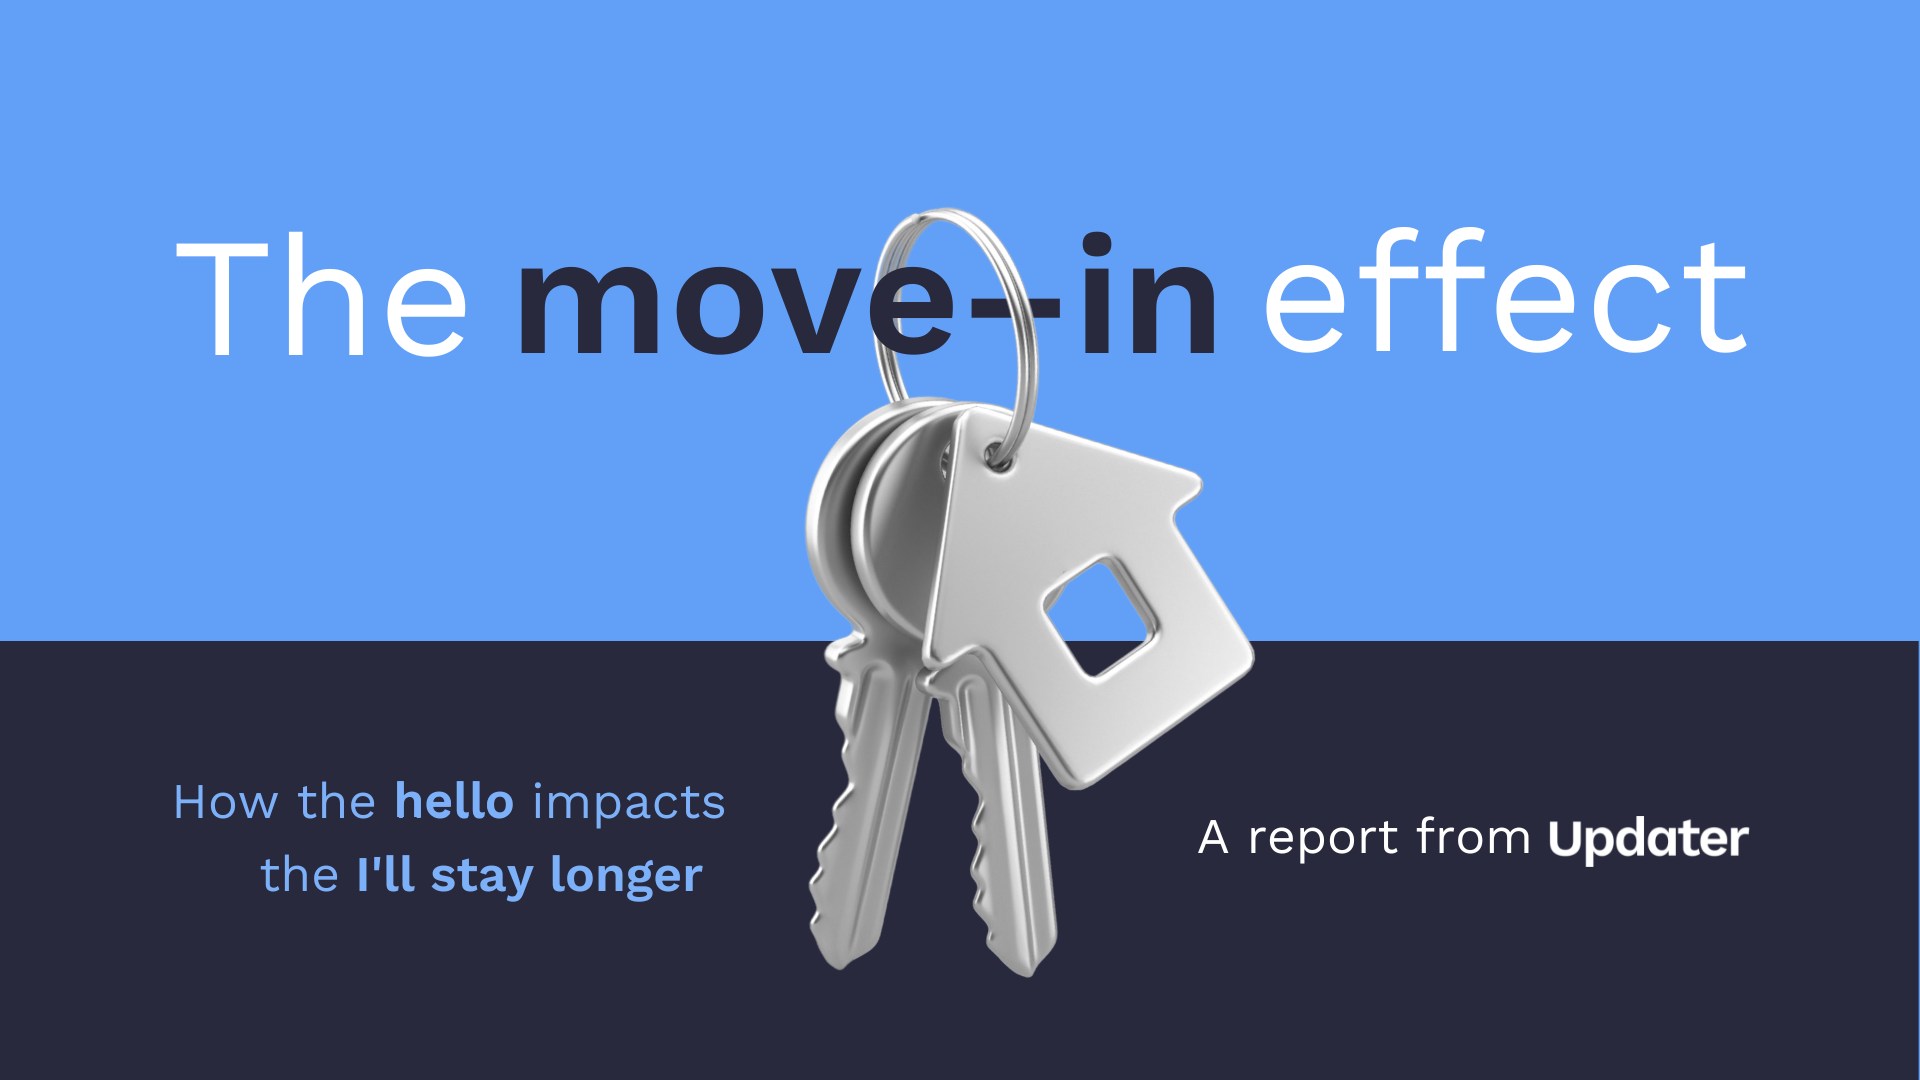 Get your move-ins right: The Move-In Effect report released